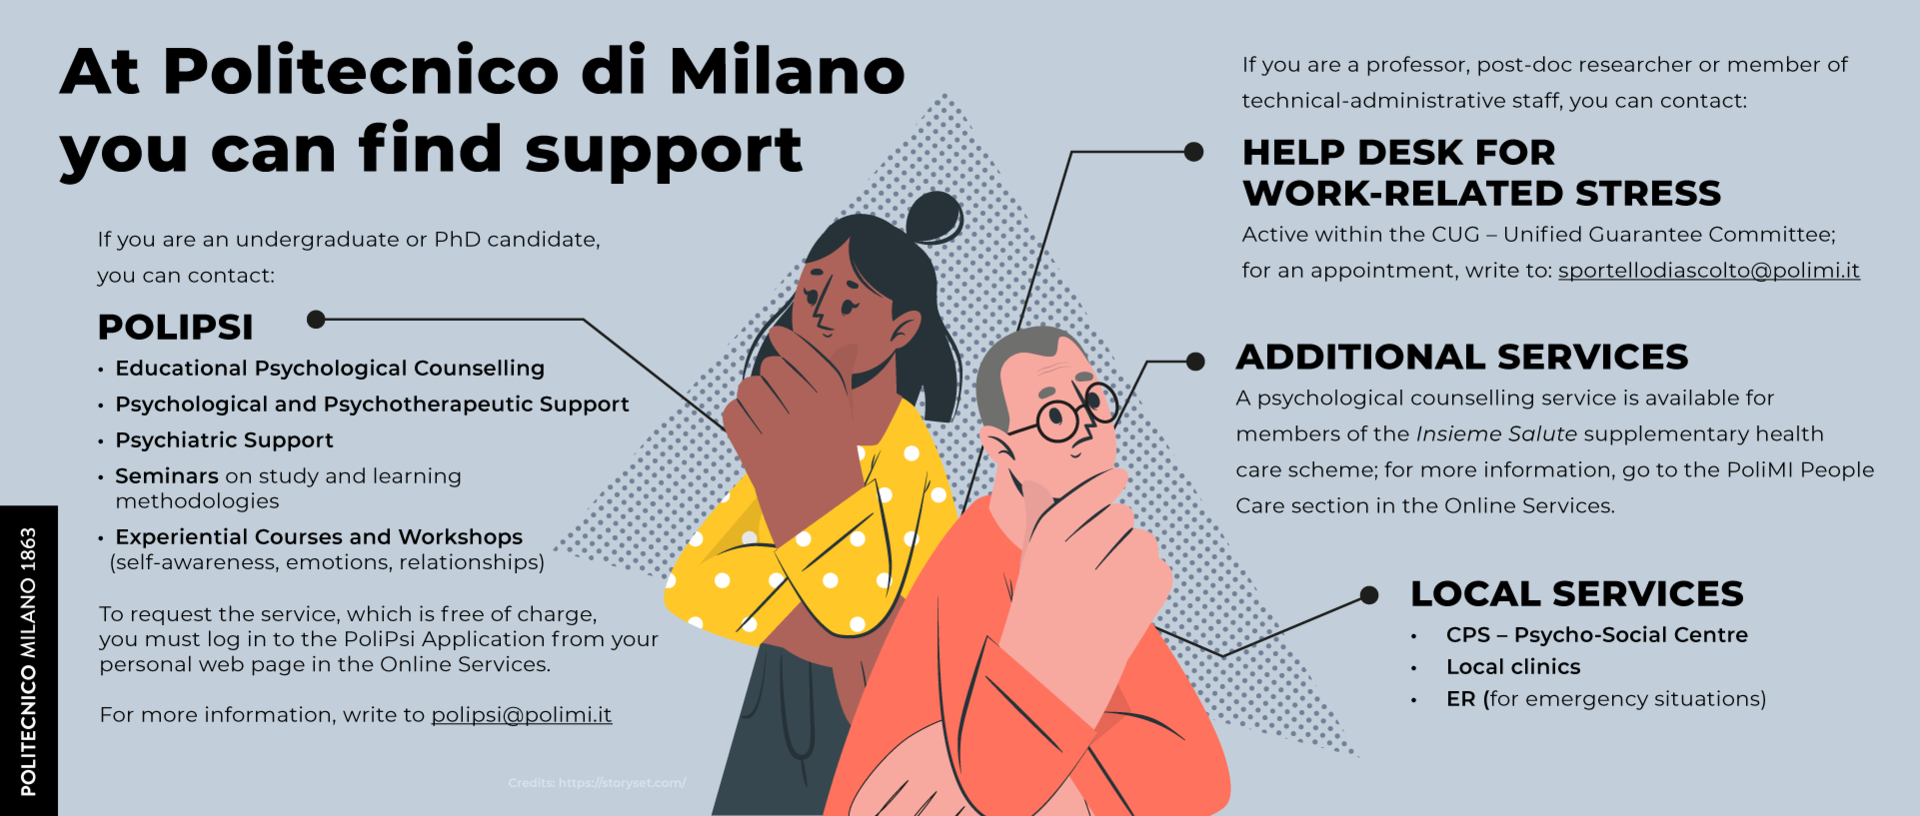 If you are an undergraduate or PhD candidate, you can contact POLIPSI: the service is free of charge; log in to the PoliPsi application from the Online Servicese; for more info, write to: polipsi@polimi.it. If you are a professor, post-doc researcher or member of technical-administrative staff, contact HELP DESK FOR WORK-RELATED STRESS: write to sportellodiascolto@polimi.it. OTHER SERVICES: psychological counselling for members of Insieme Salute; local services (CPS Psycho-Social Centre, Local clinics, ER for emergency)